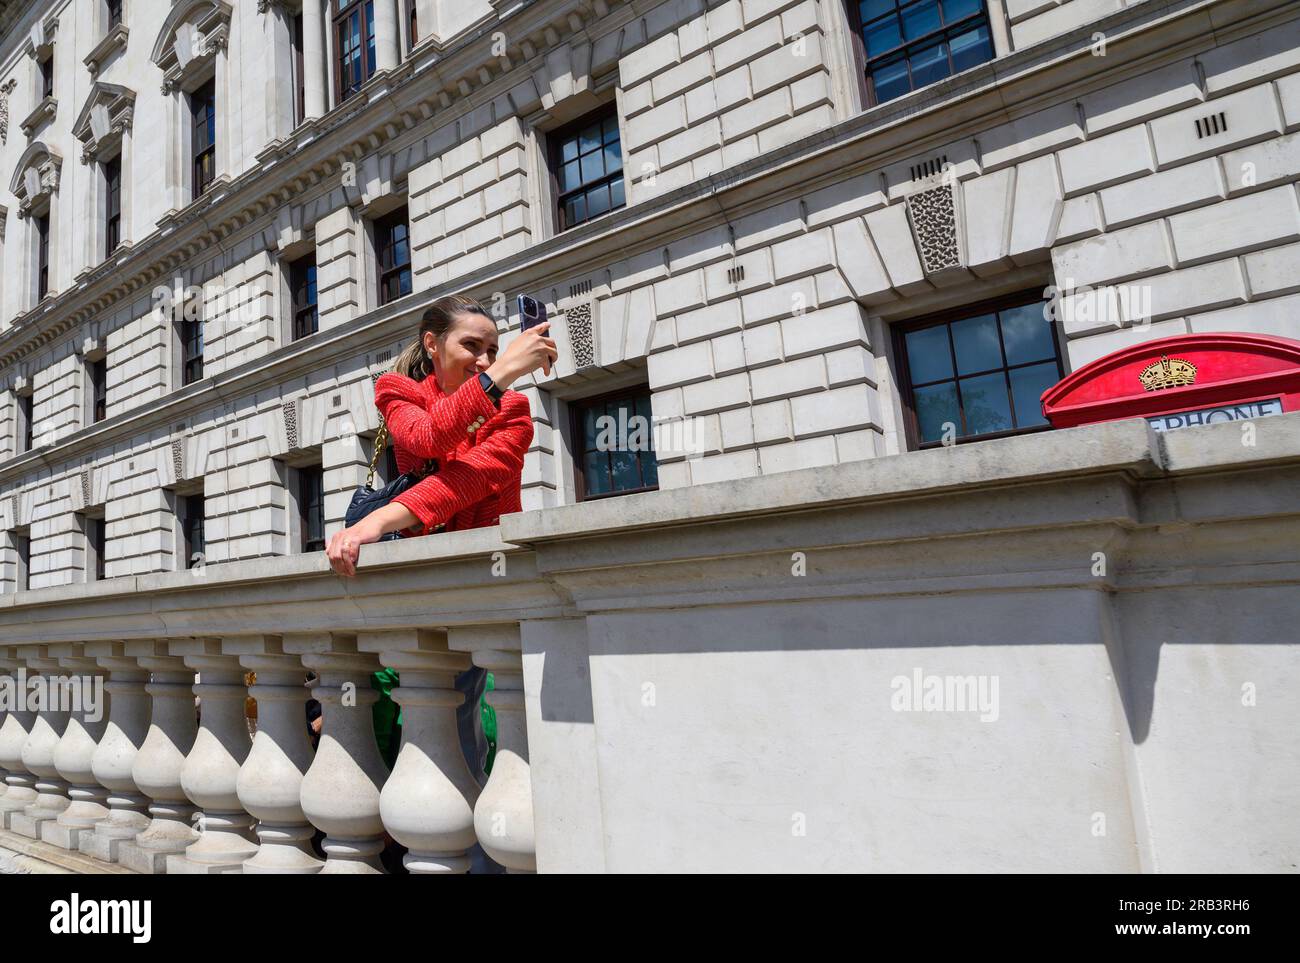 London, UK. Young woman in red taking a selfie in Parliamnt Square, Westminster Stock Photo